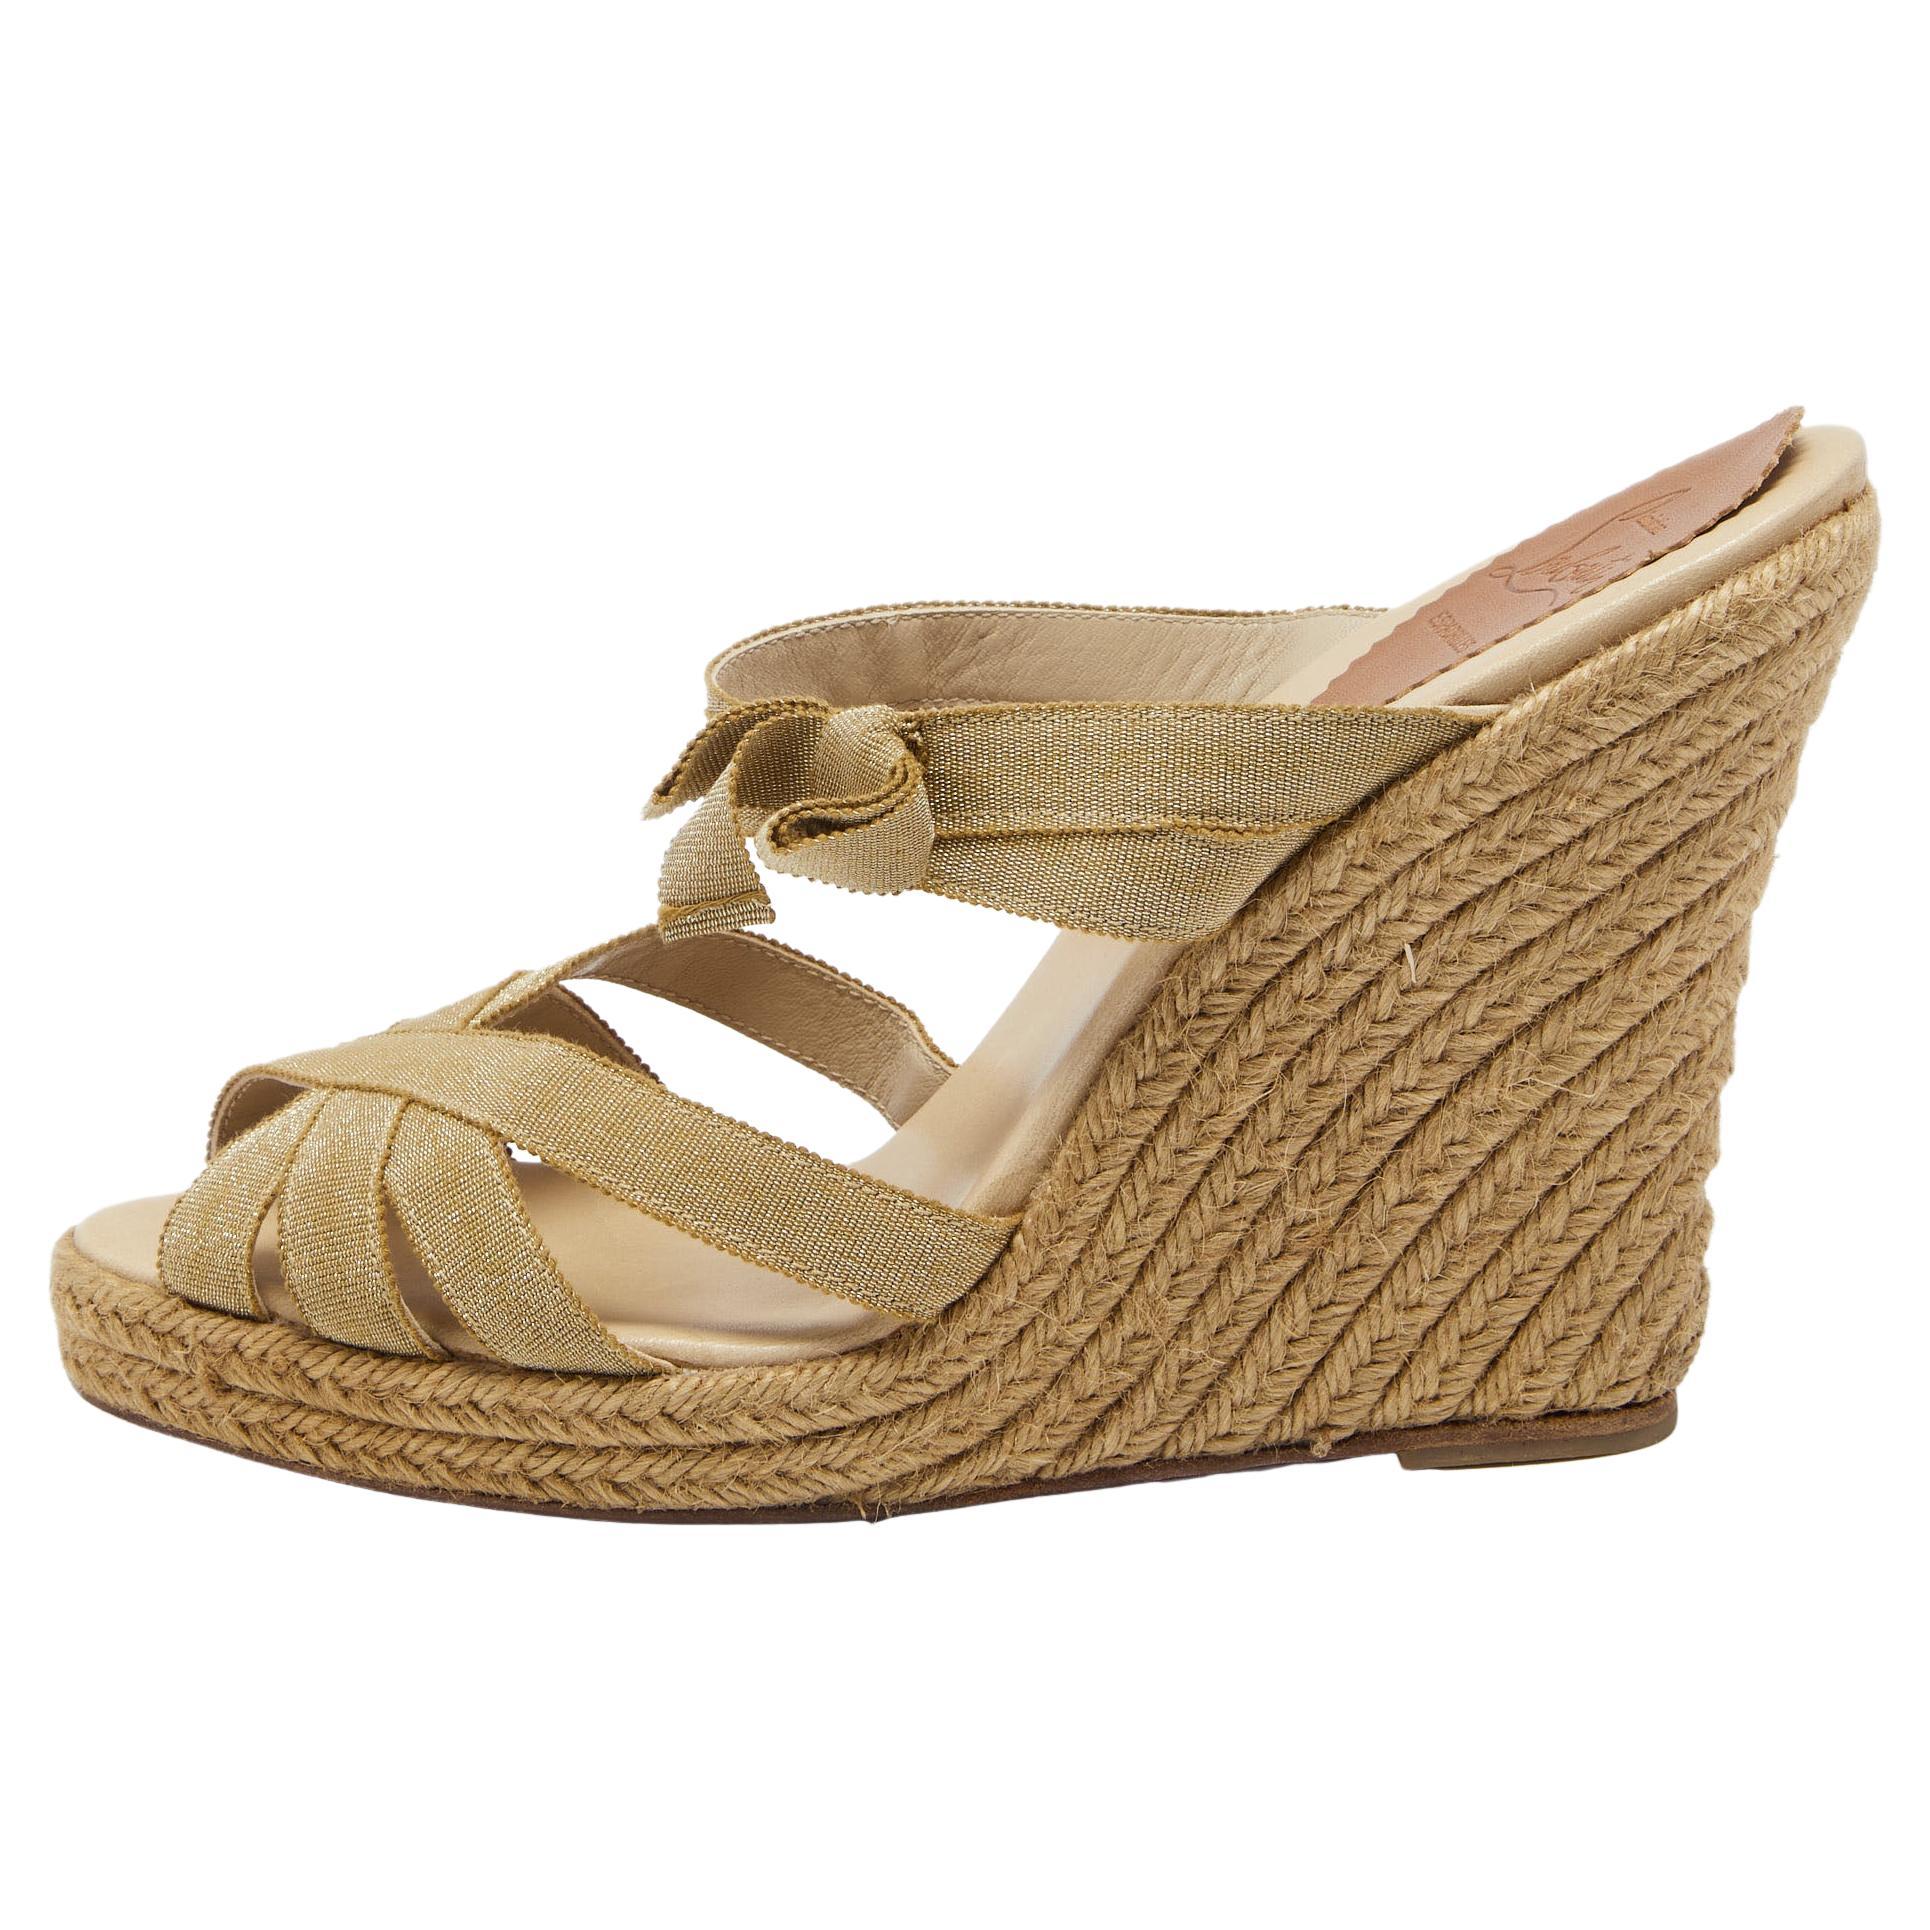 Christian Louboutin Gold Fabric Delfin Espadrille Wedge Sandals Size 41